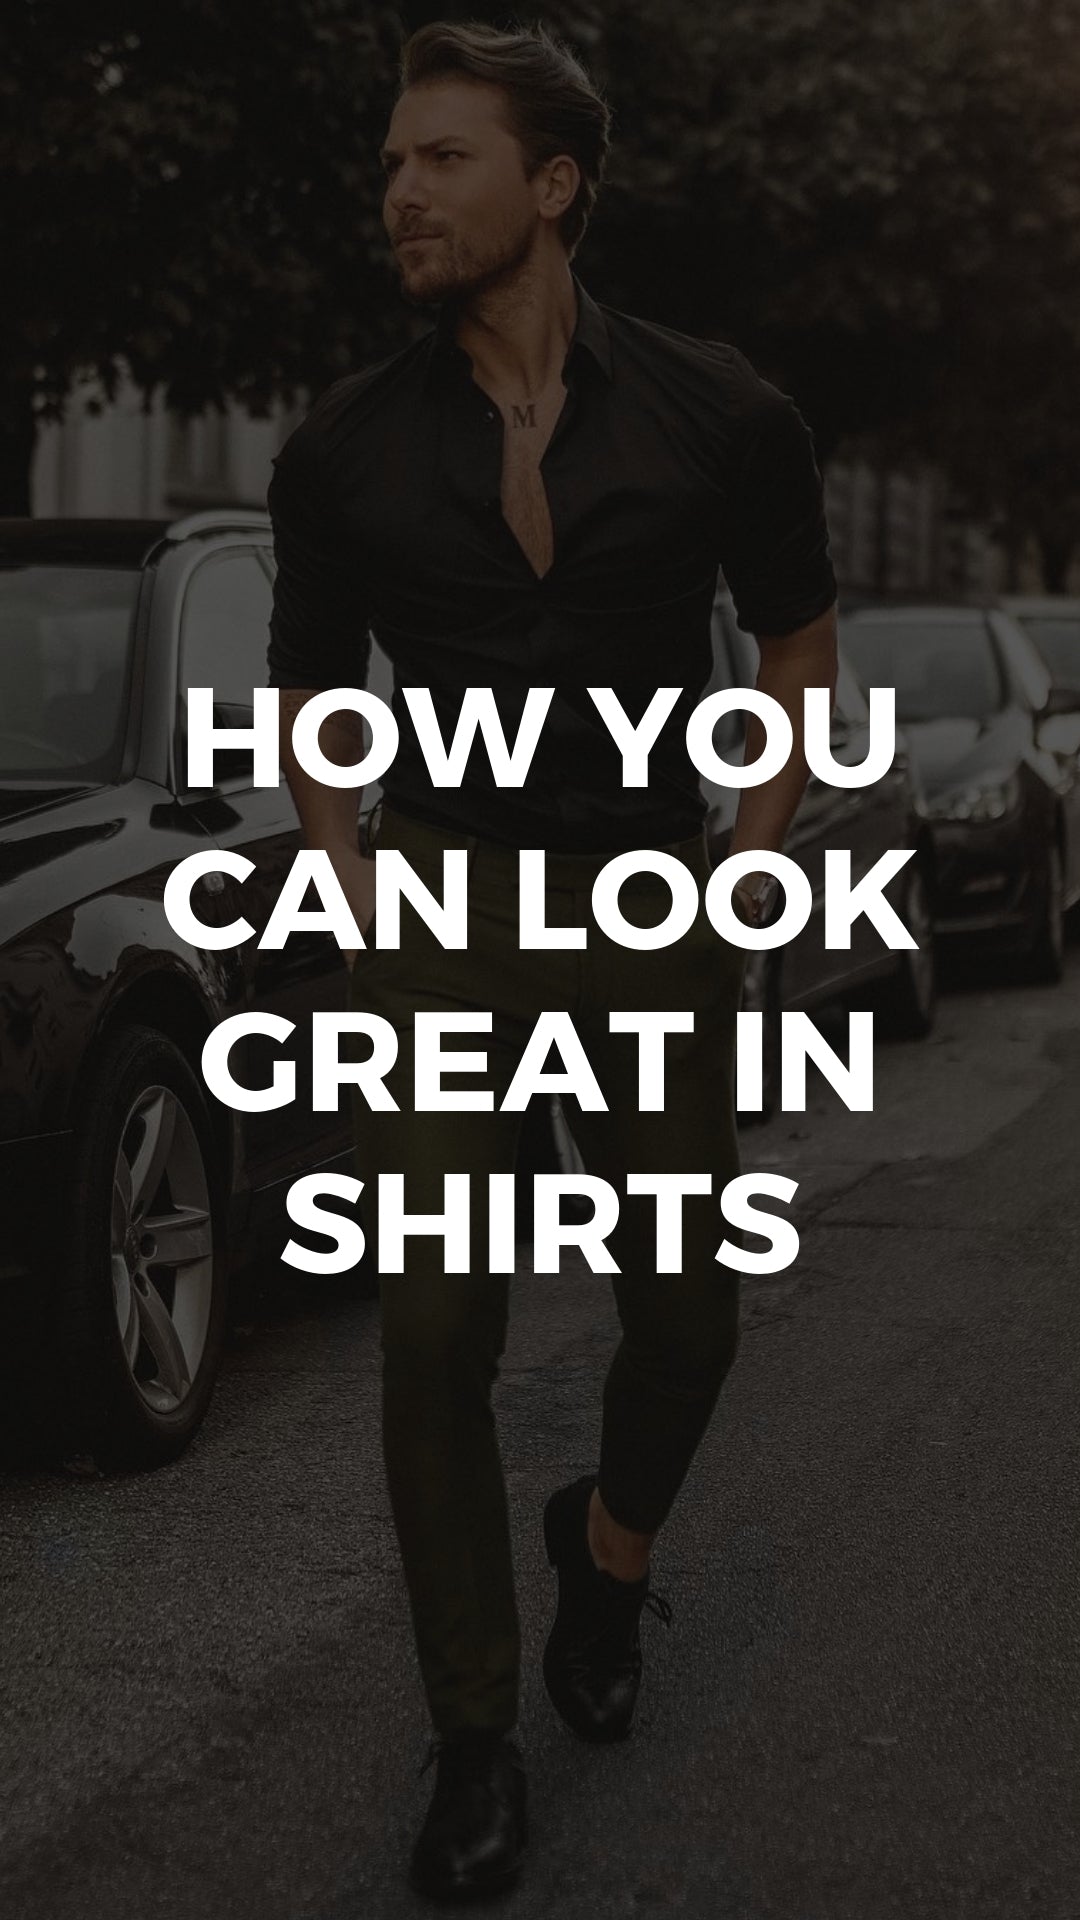 5 Outfits To Looking Great In Shirts – LIFESTYLE BY PS